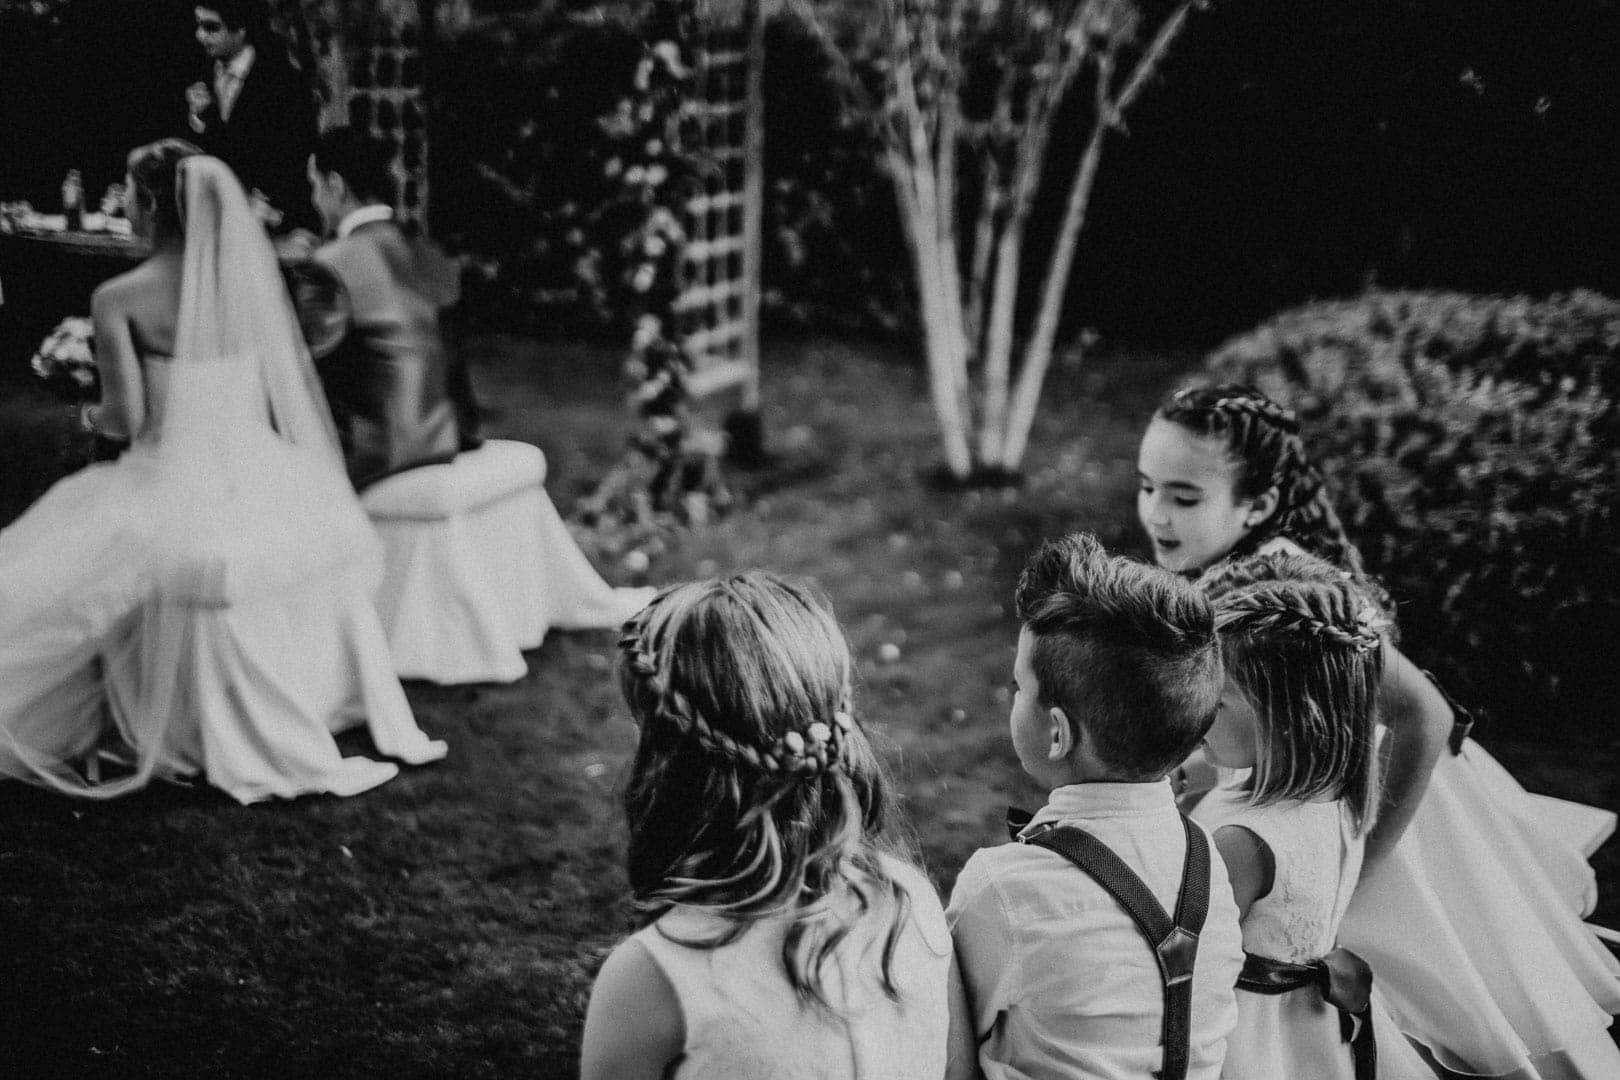 Documented photograph at the time of the ceremony with children and the bride and groom at the altar in the restaurant garden in Ibiza